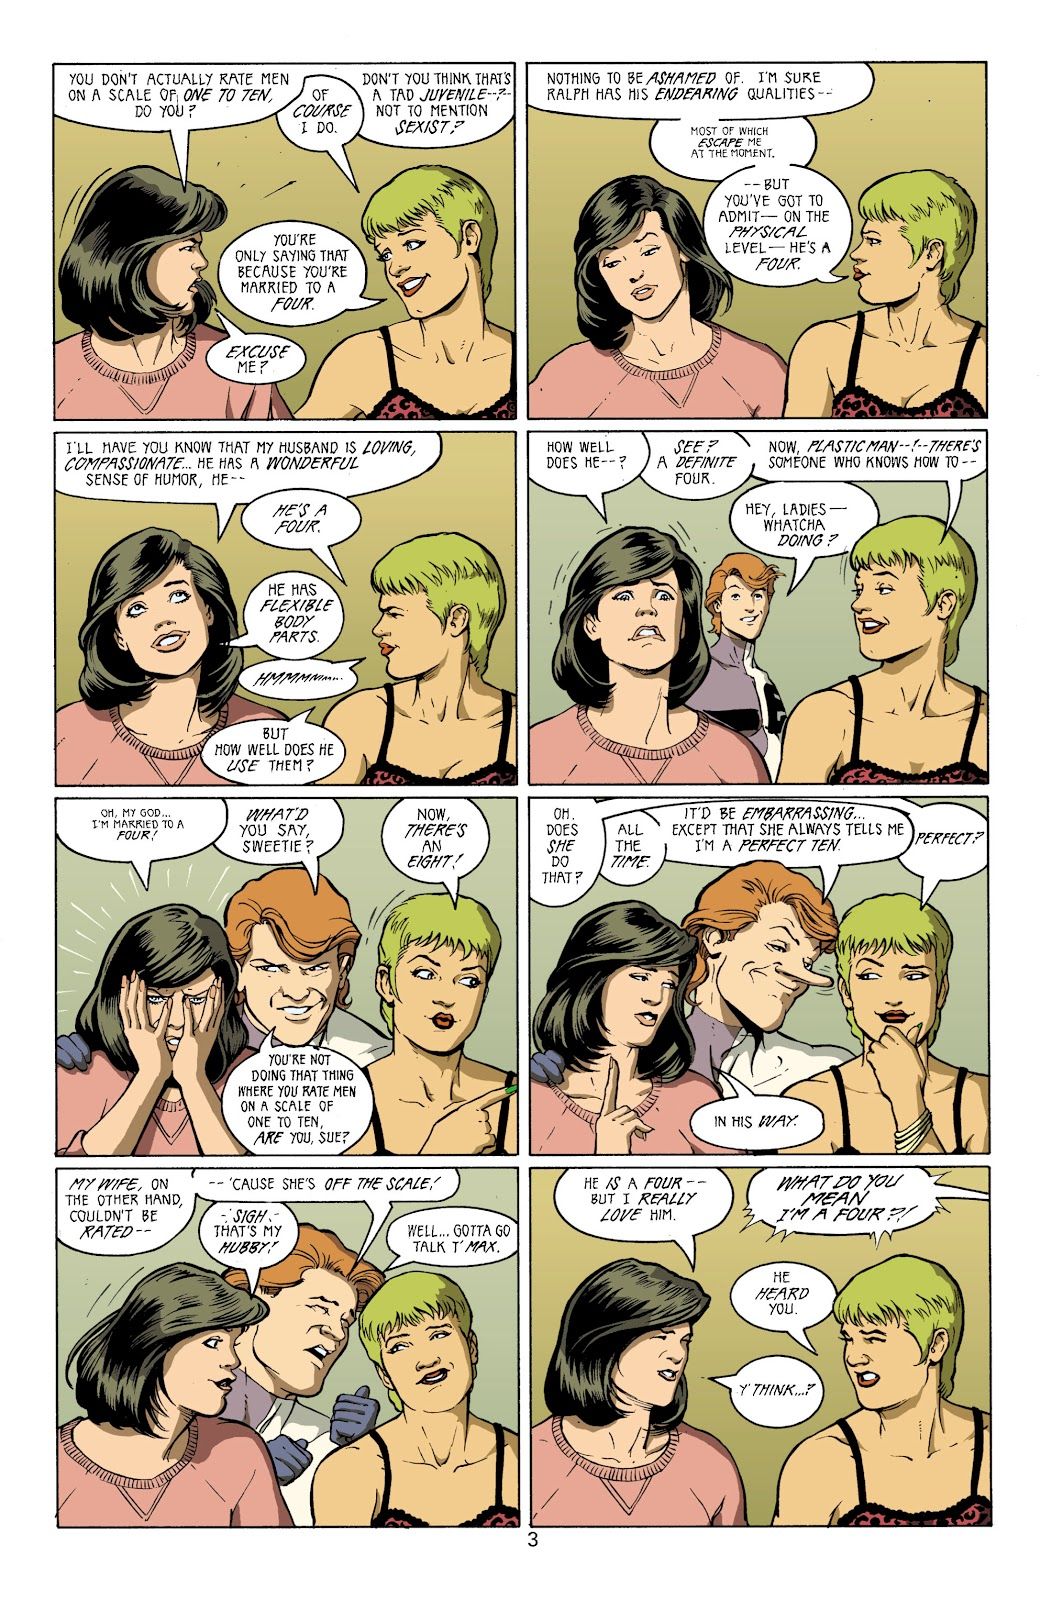 Sue and Fire fail the Bechdel test